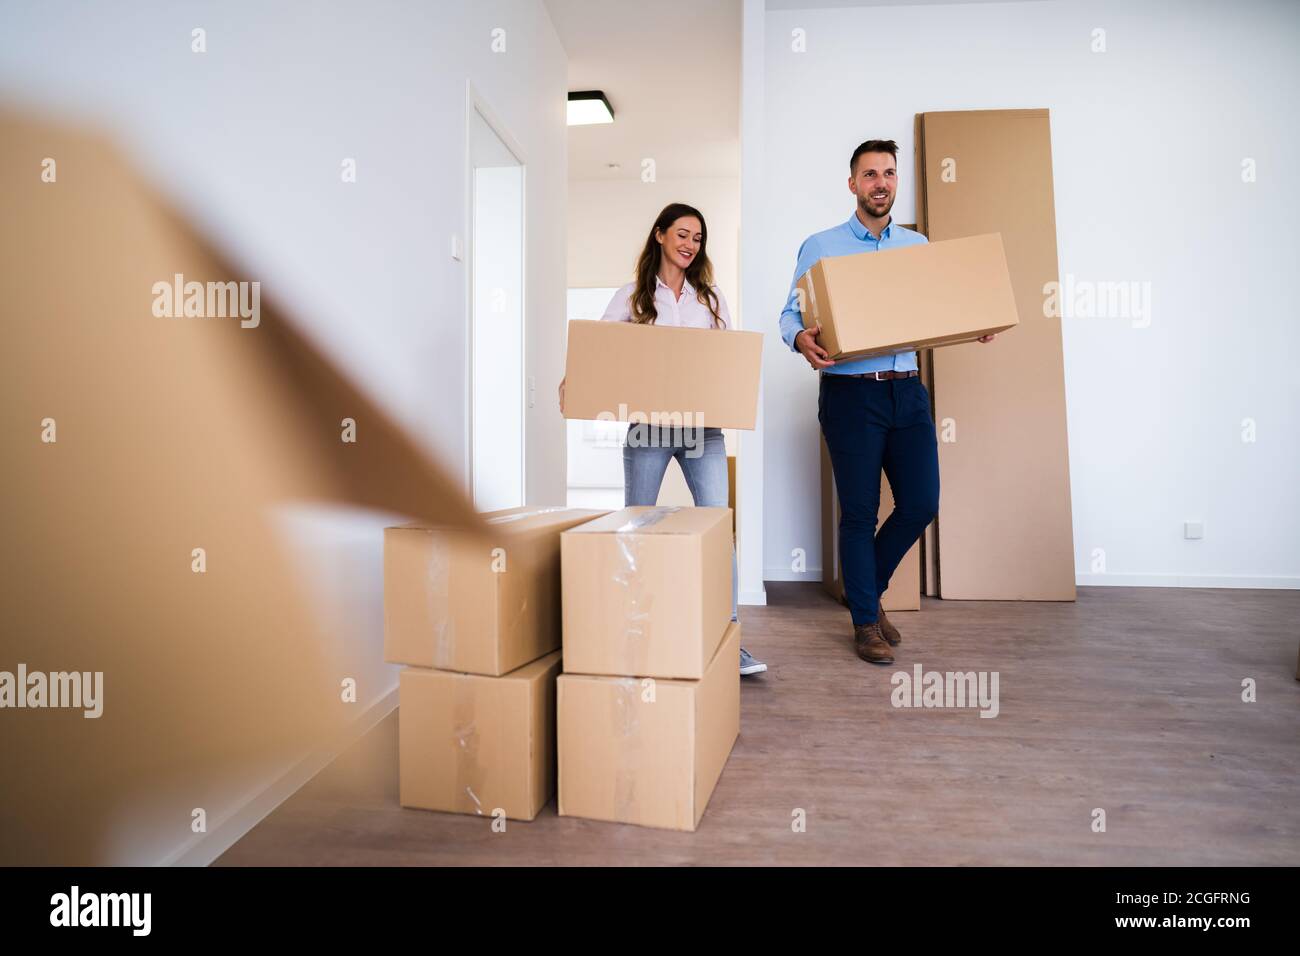 Family Relocation Carrying Boxes Into New Home Stock Photo